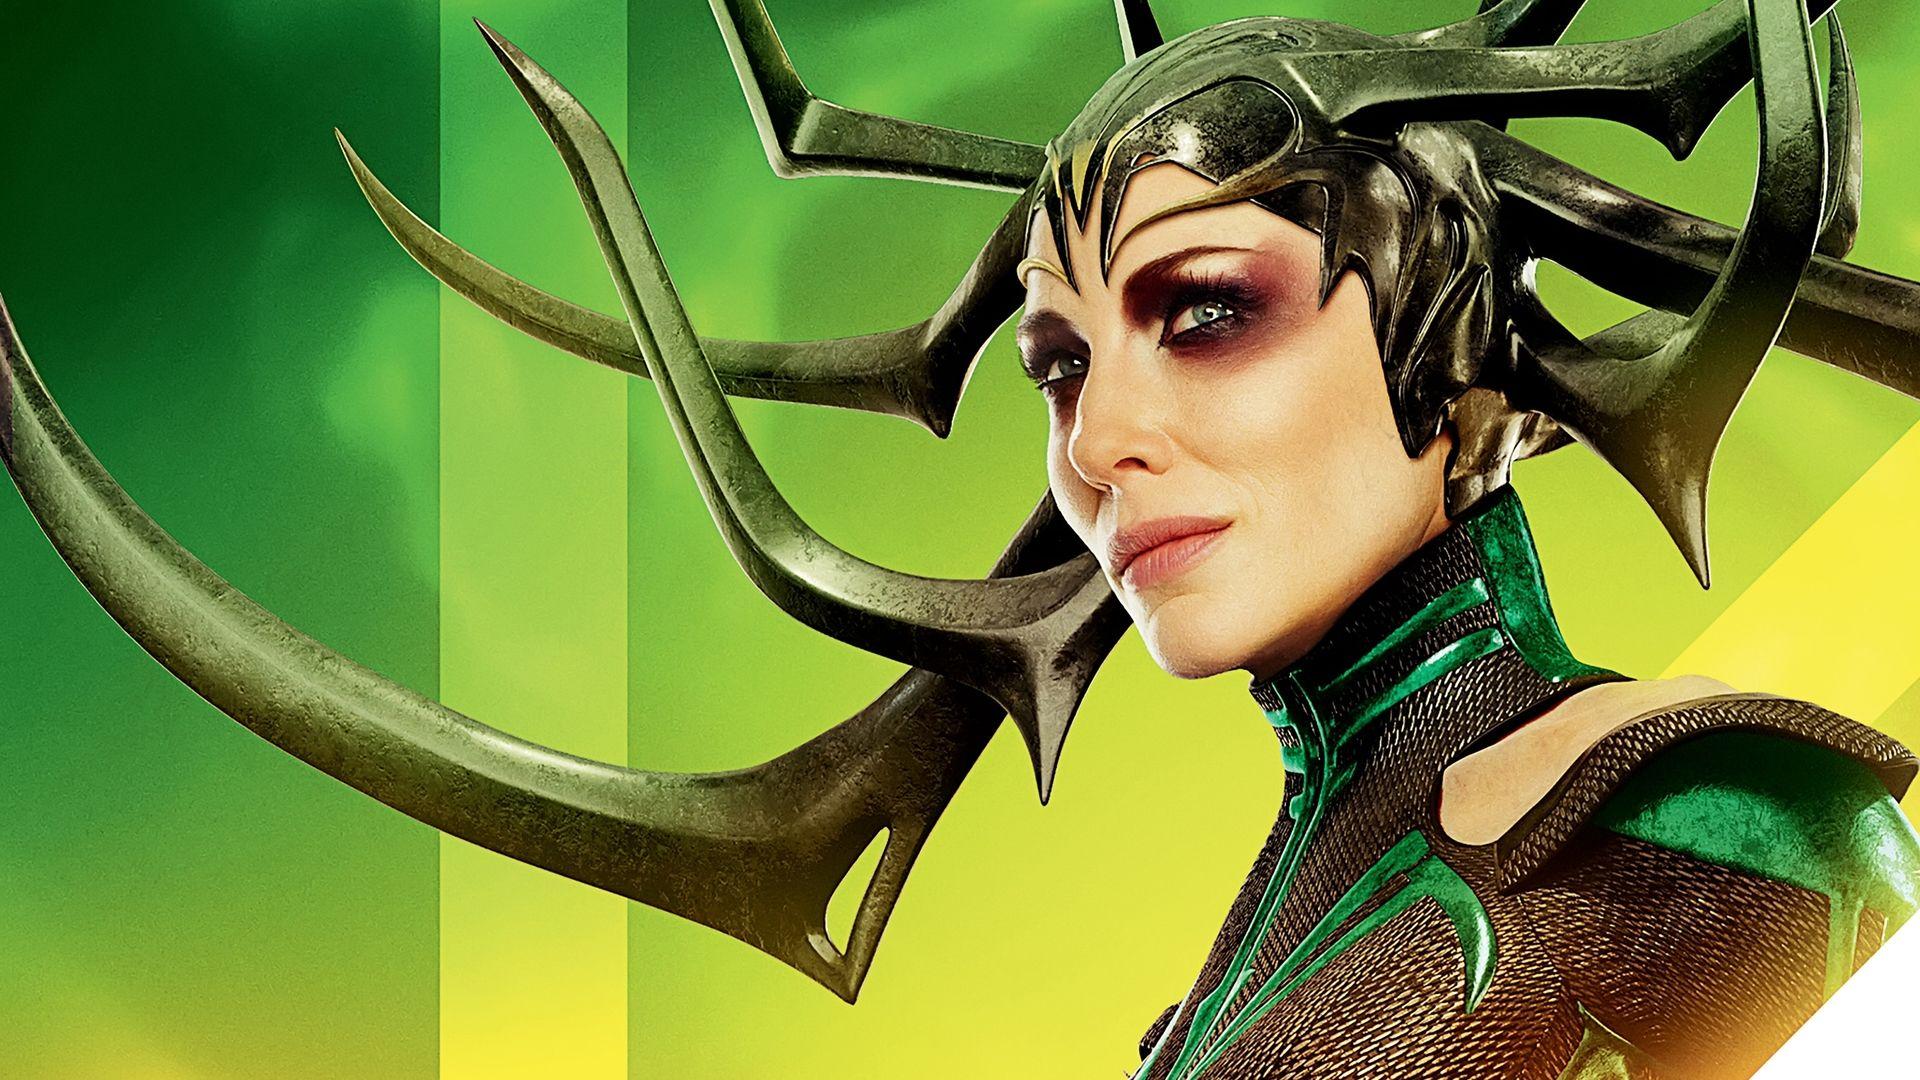 Download Cate Blanchett As Hela In Thor 240x320 Resolution, Full